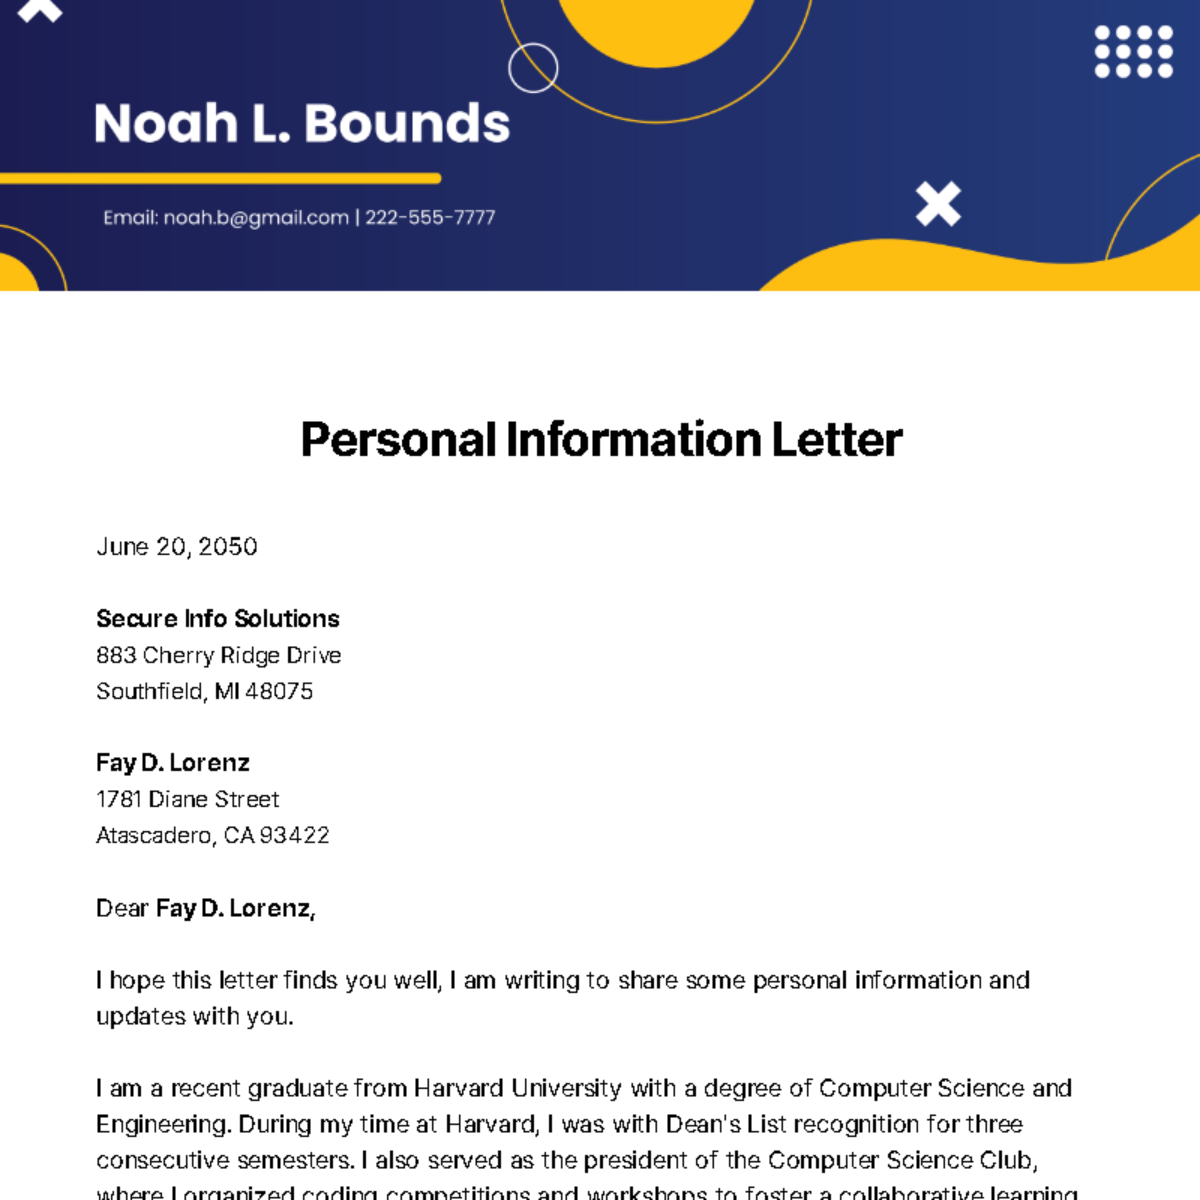 Personal Information Letter   Template